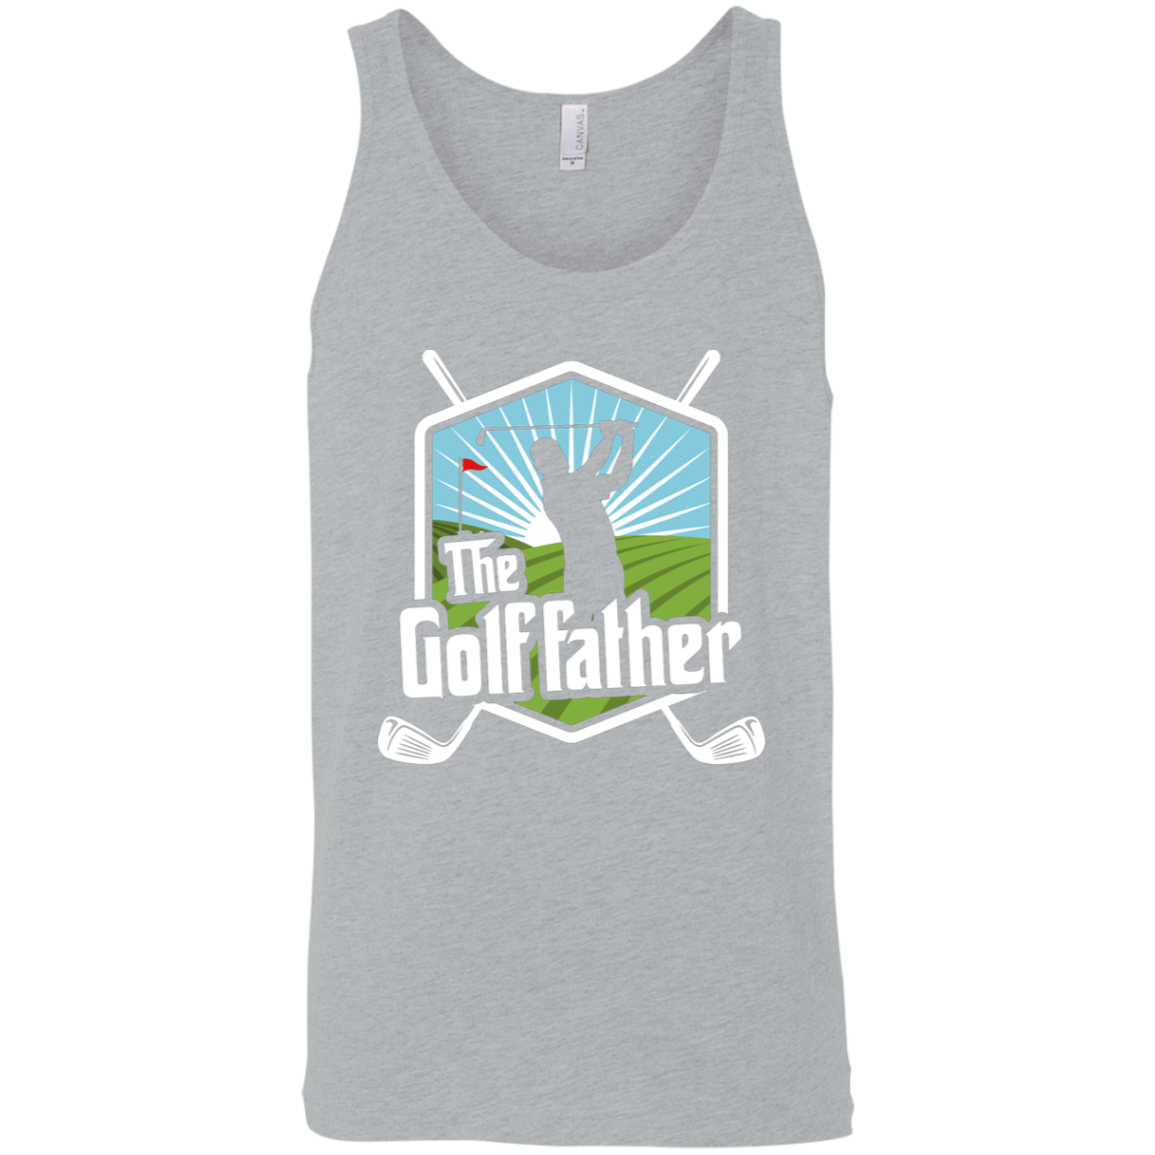 The Golf Father Tank Top Apparel - The Beer Lodge